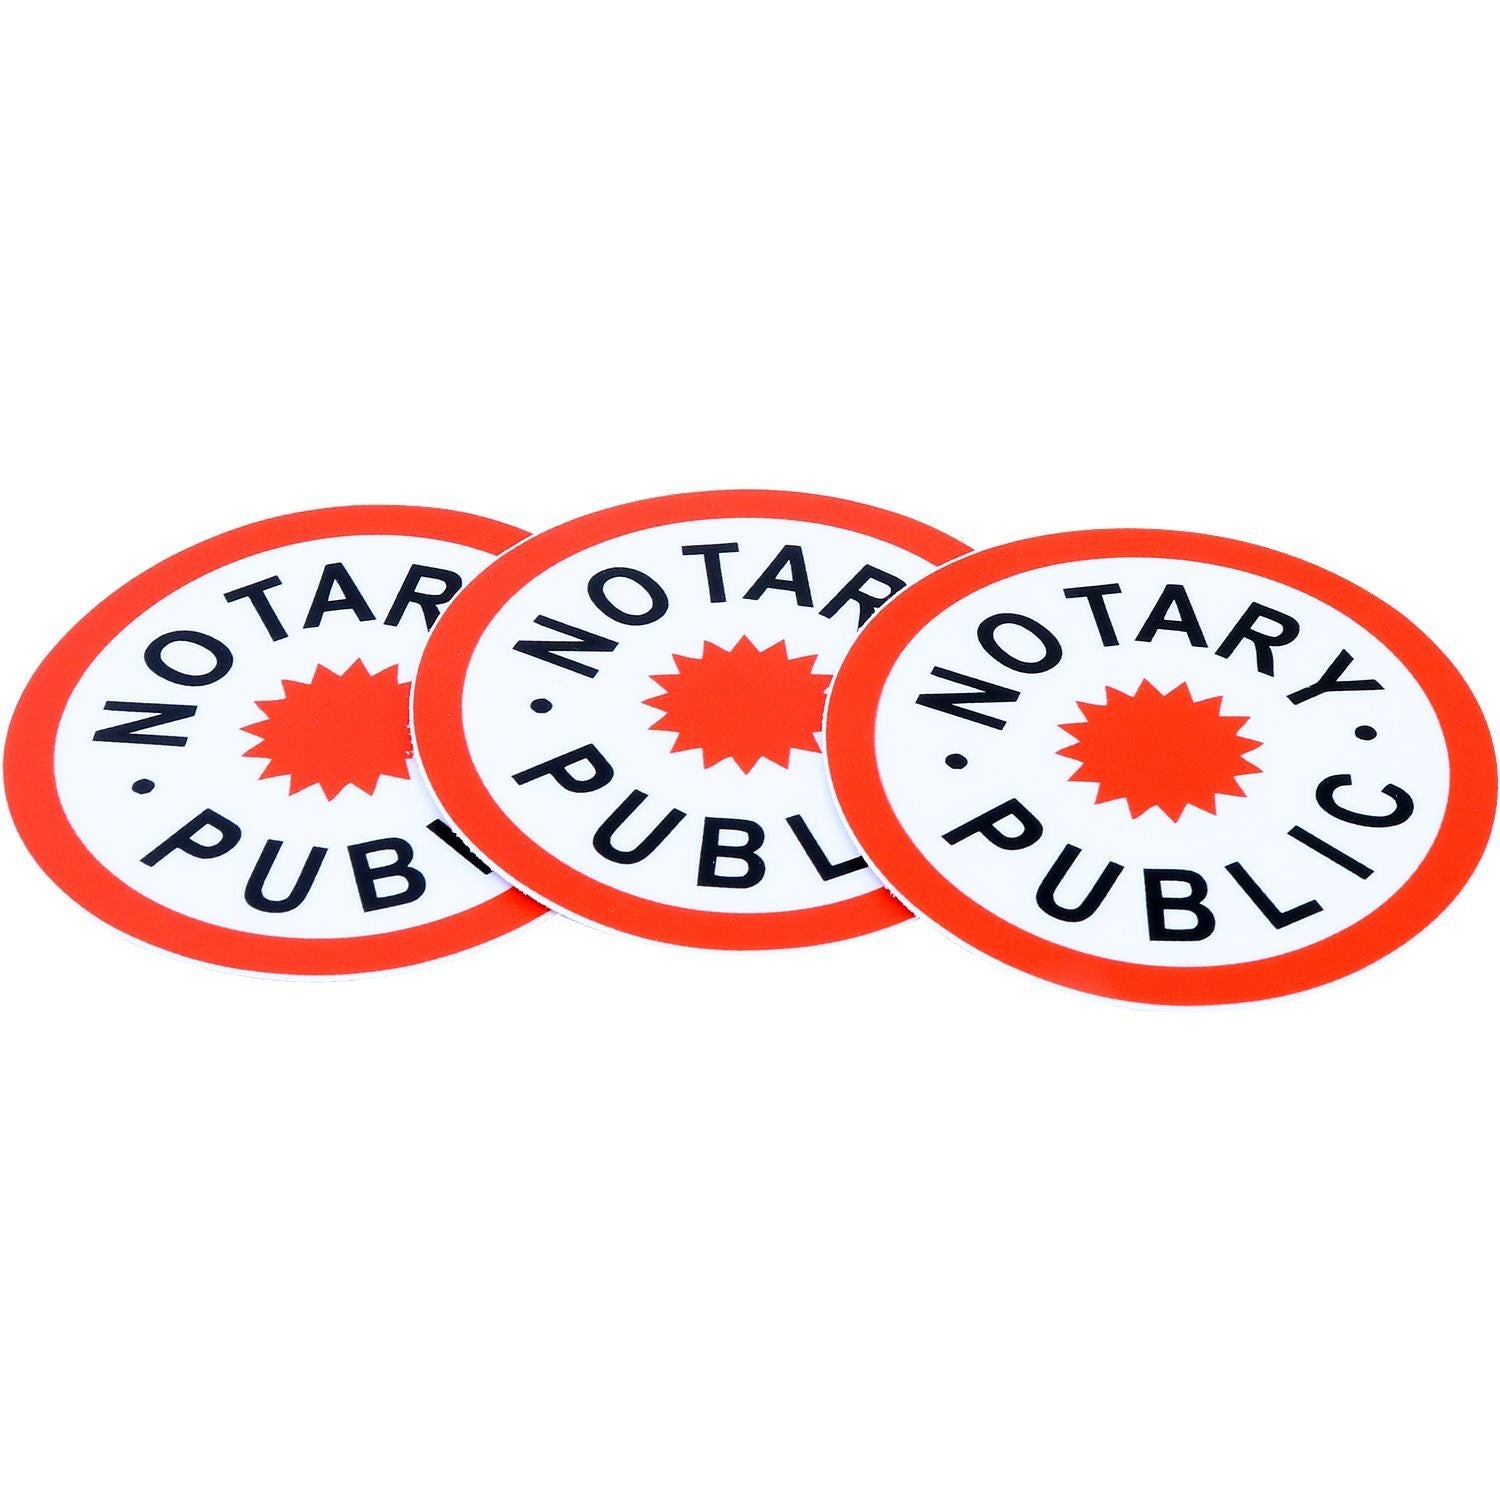 Notary Public Decal 1020 Main Image